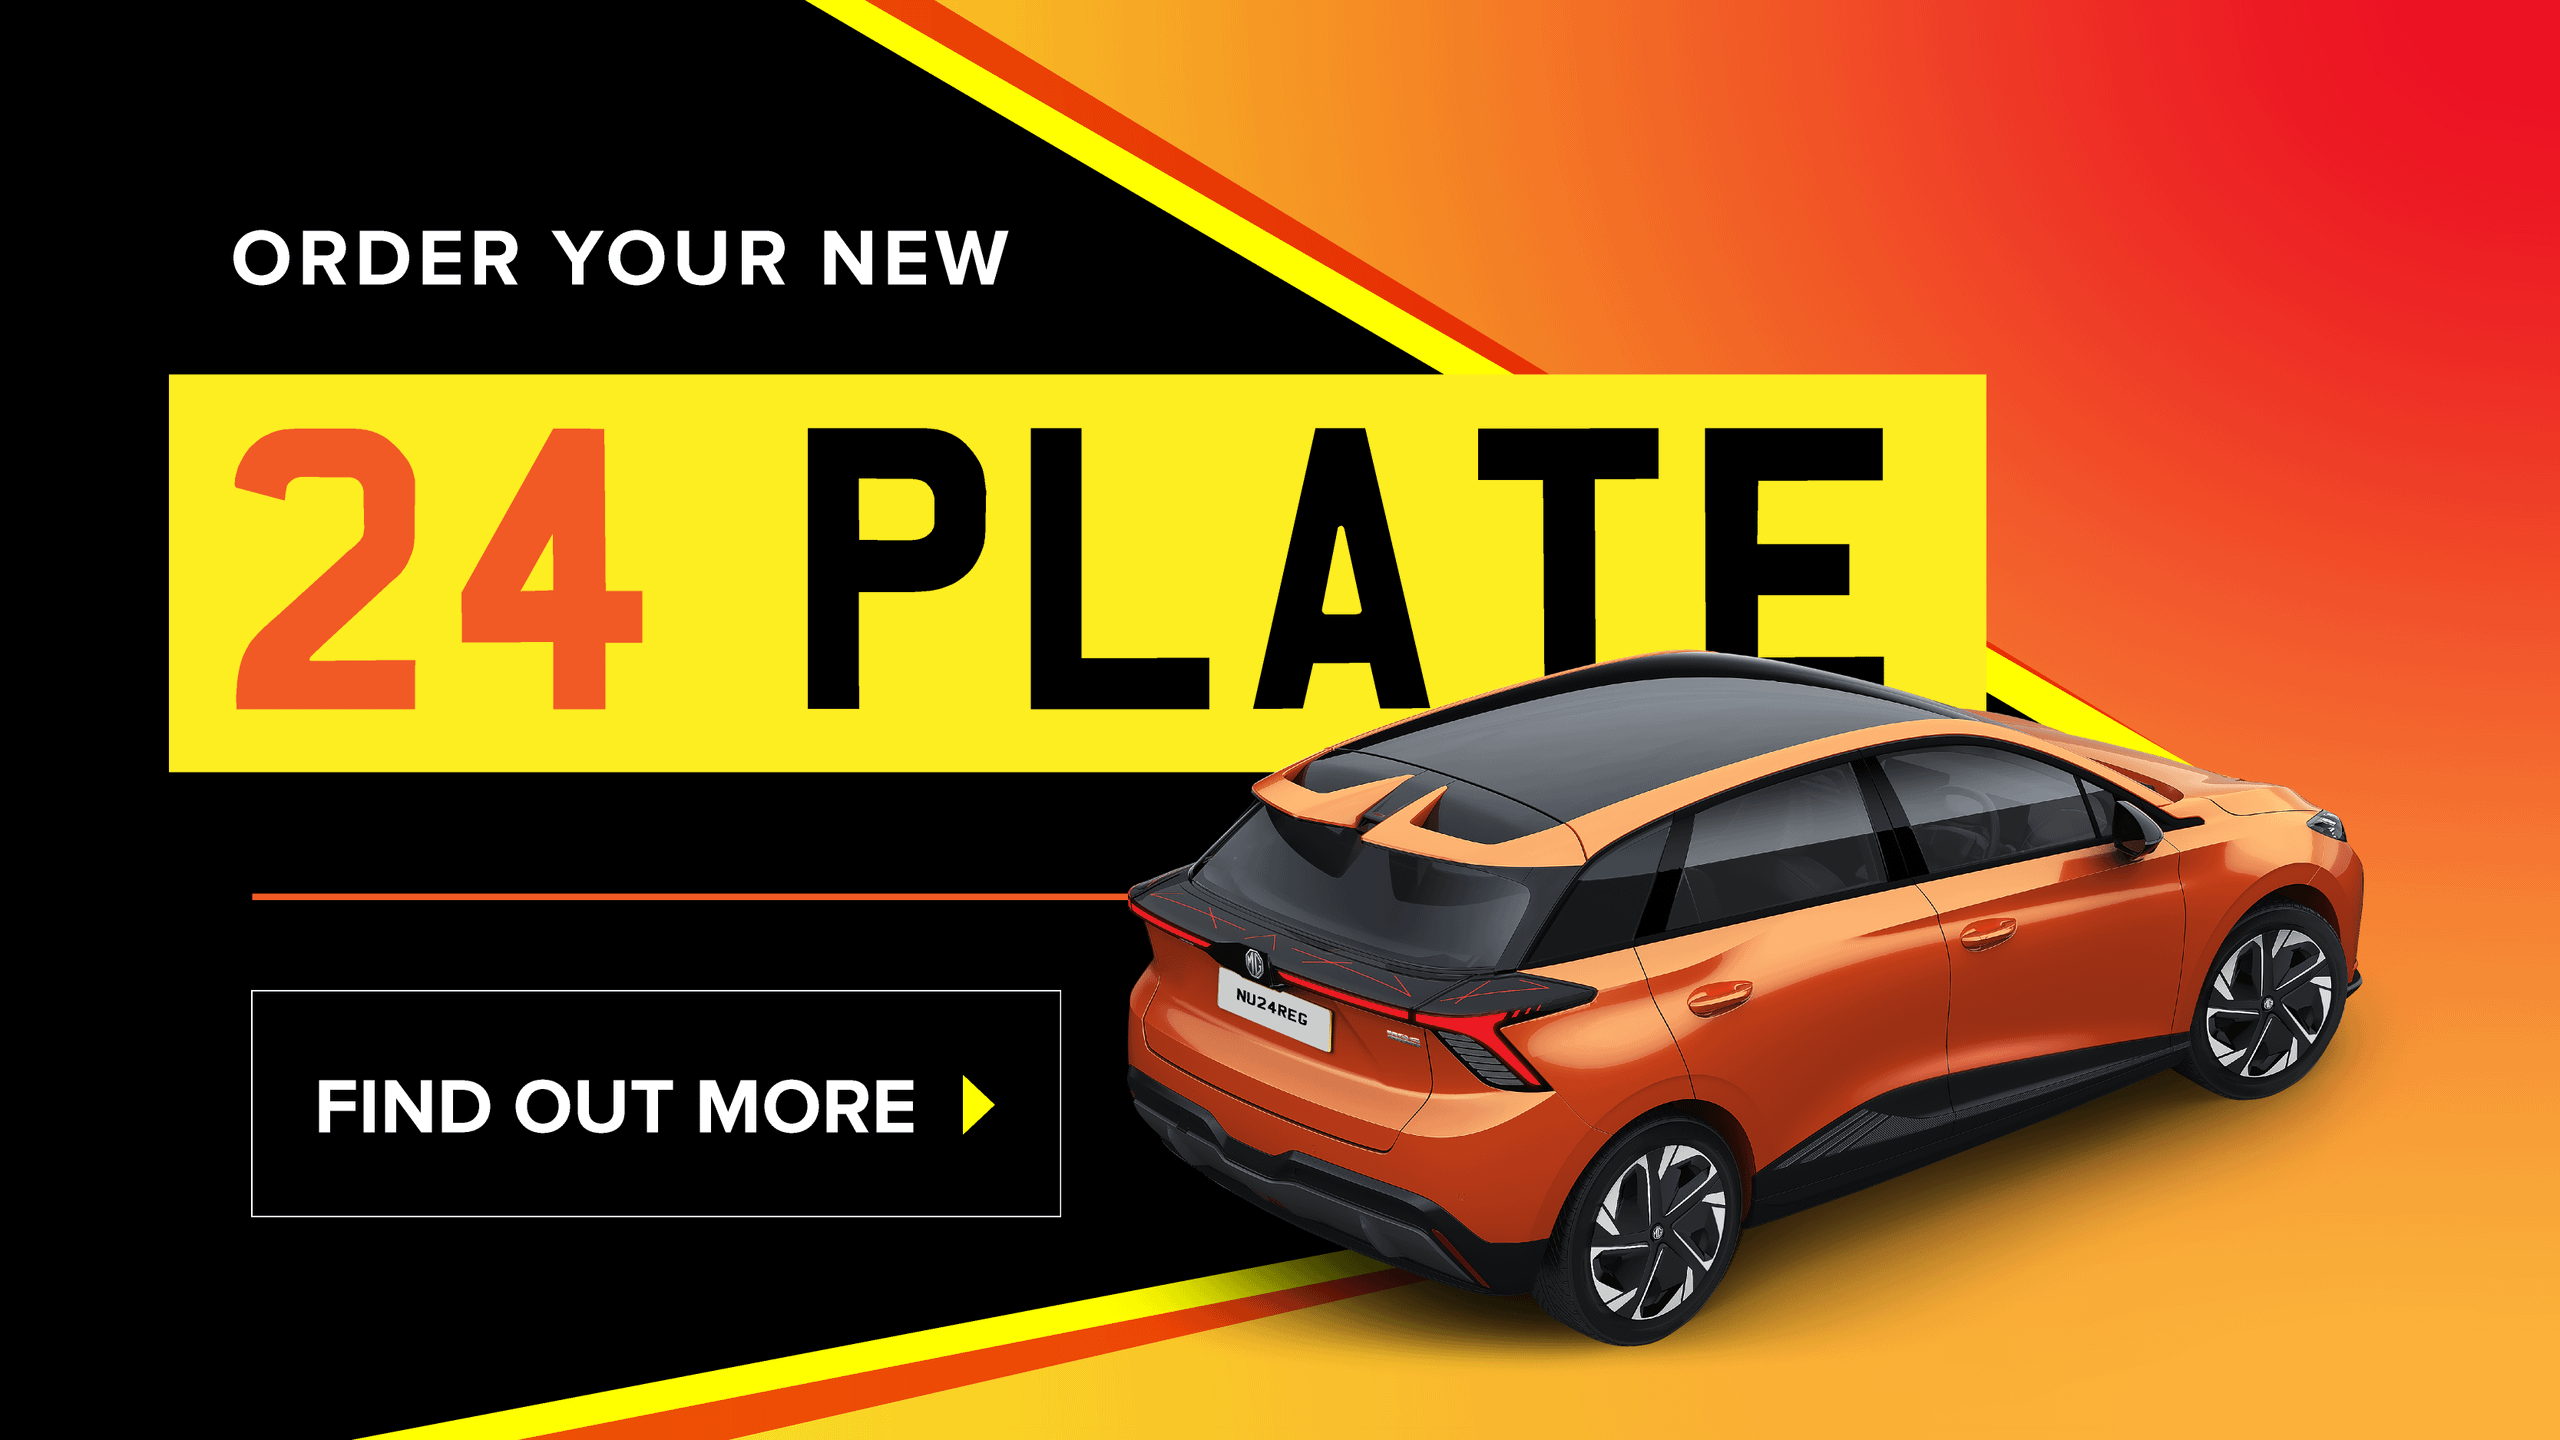 Richmond Motor Group New Car Offers for 24 Plate with a clickable Find out more button